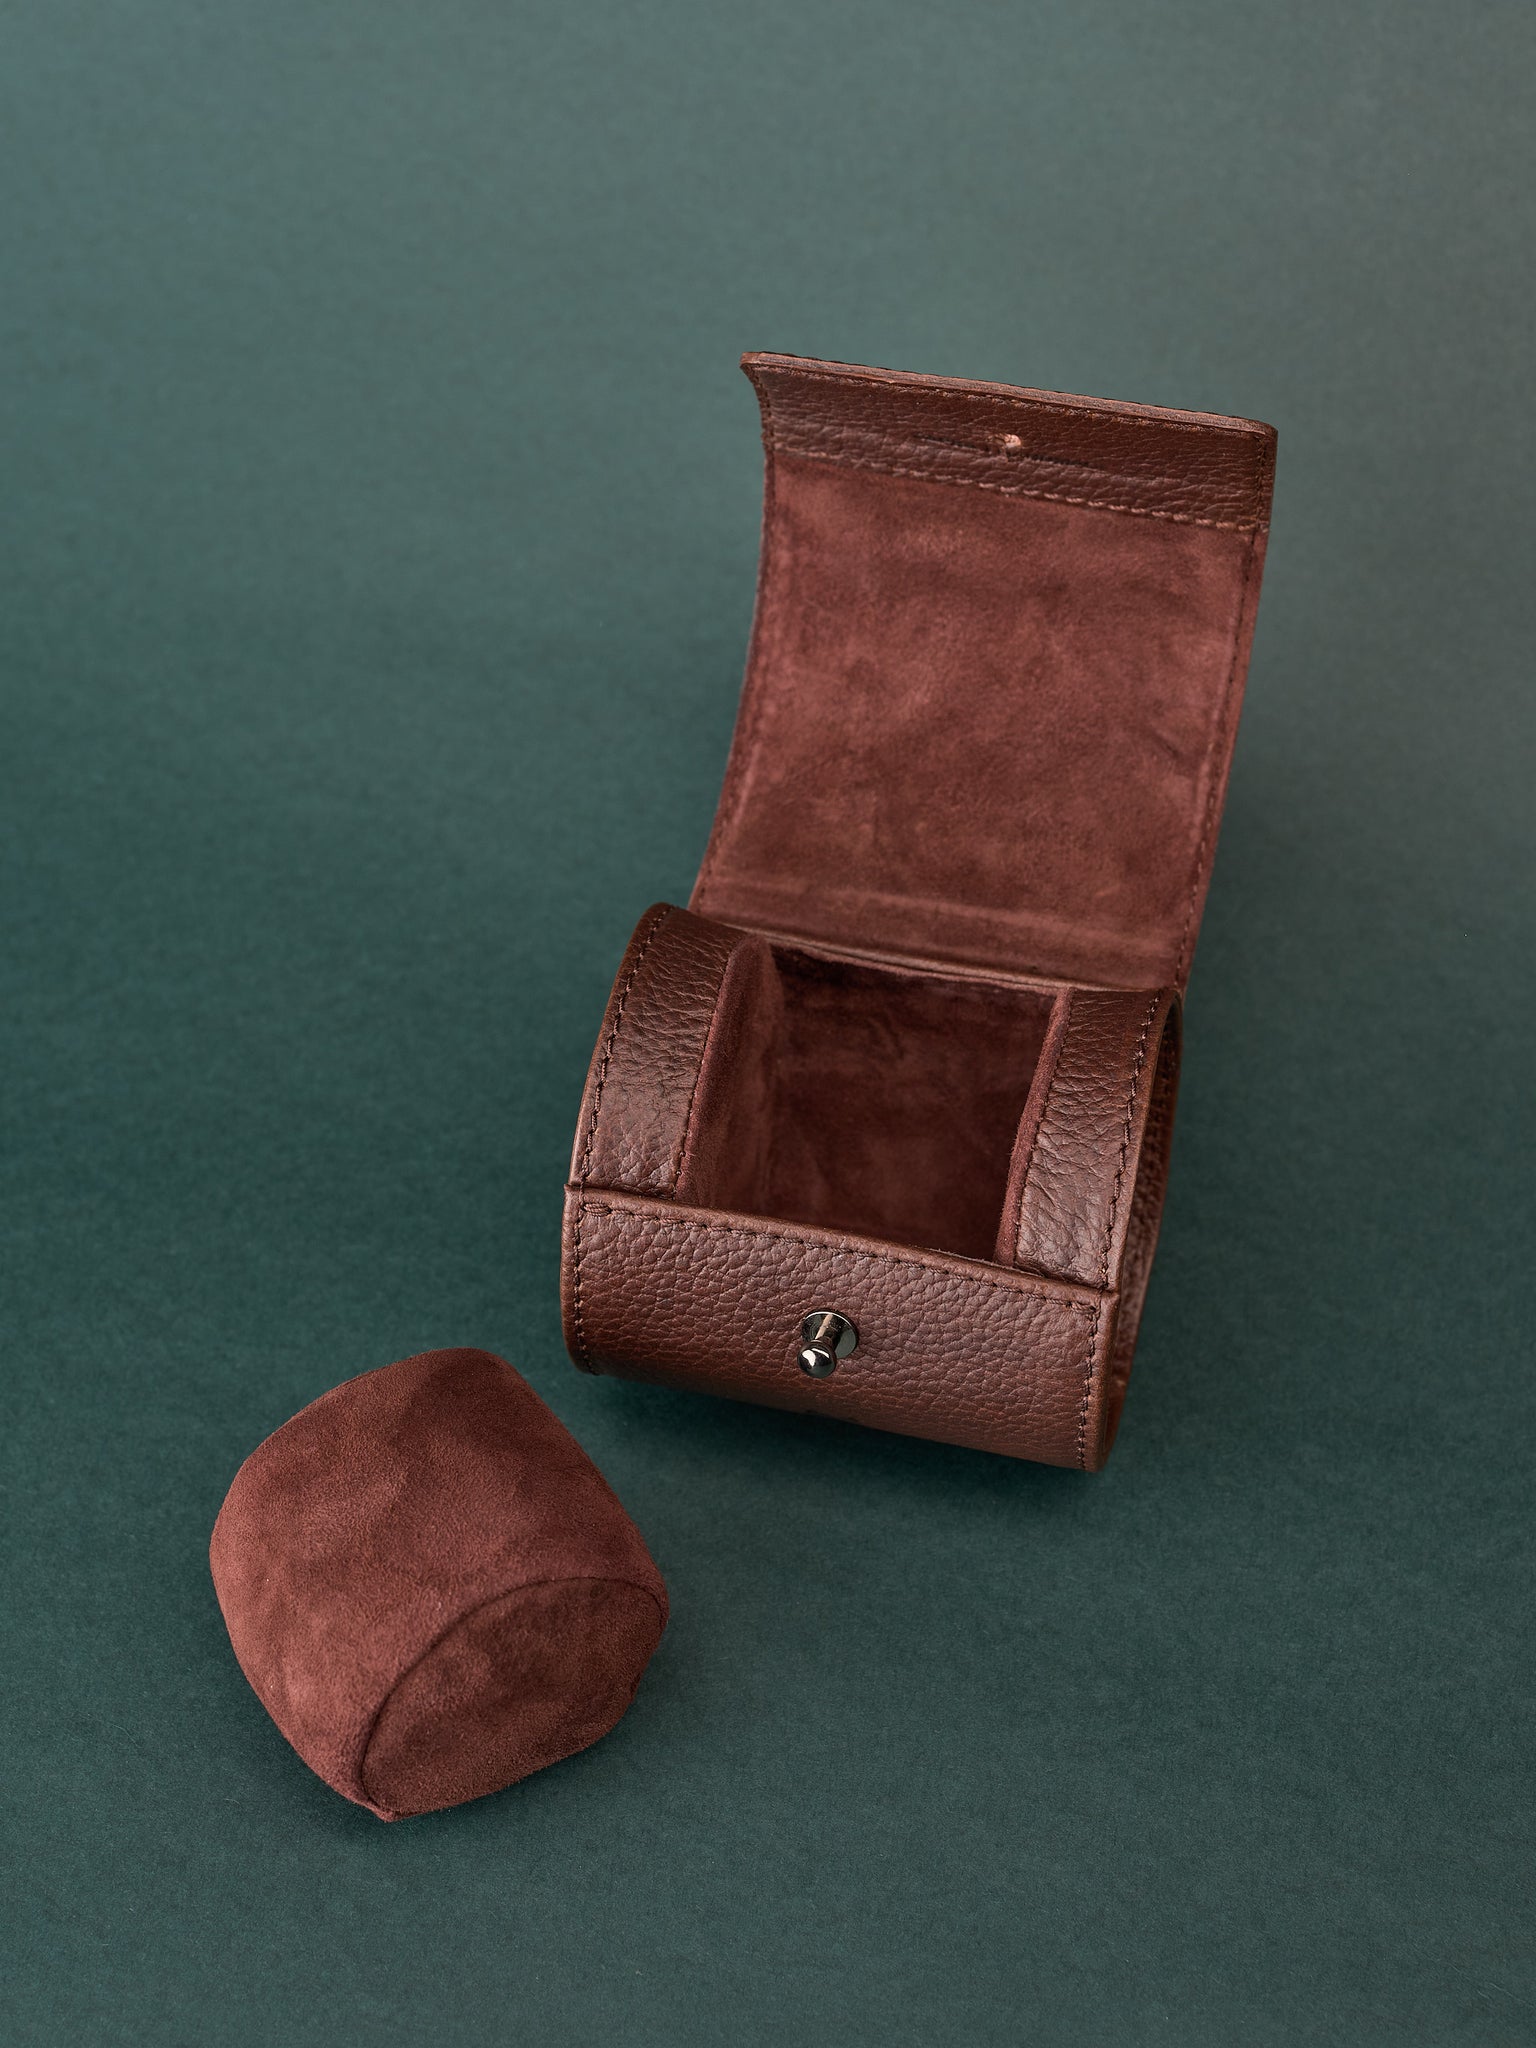 Single watch box for men brown by Capra Leather